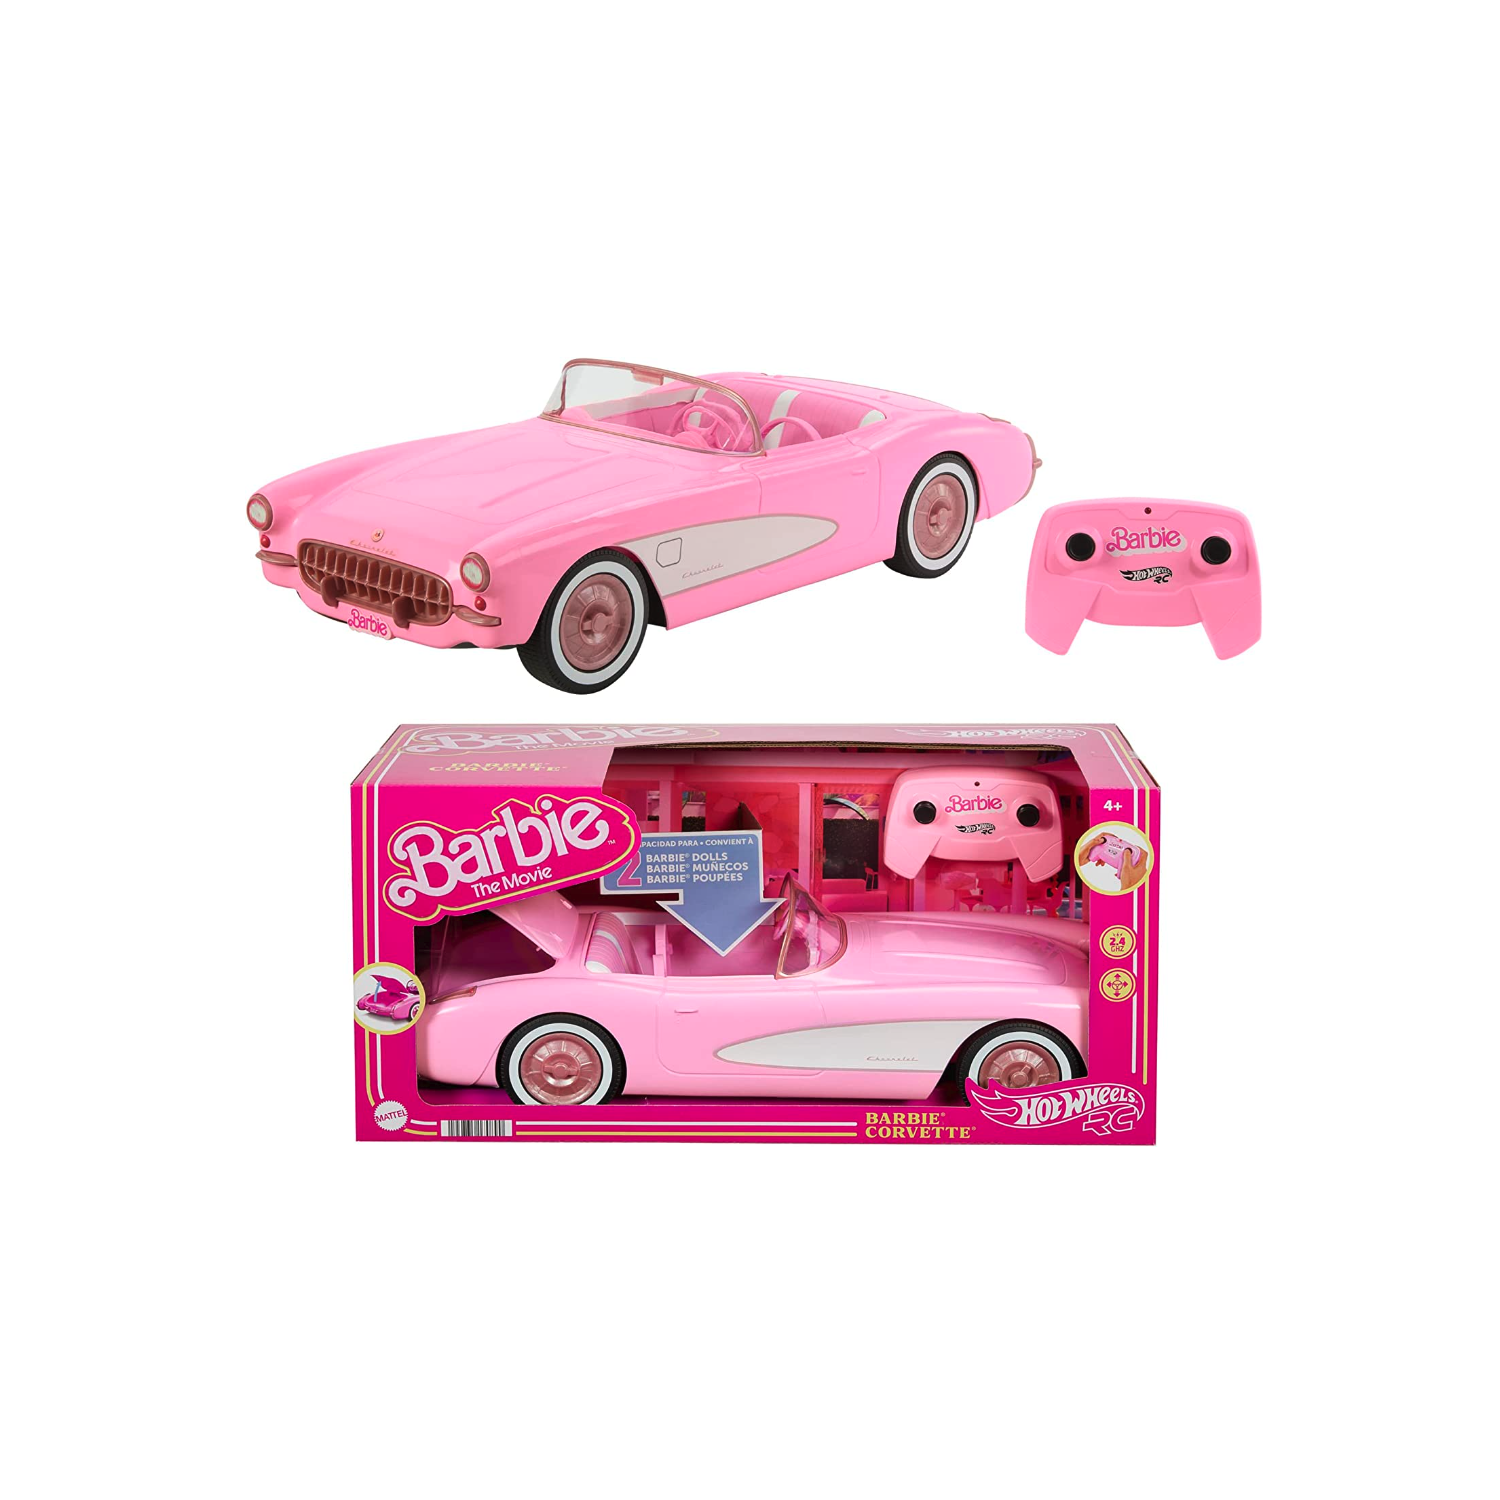 Hot Wheels RC Barbie Corvette, Battery-Operated Remote-Control Toy